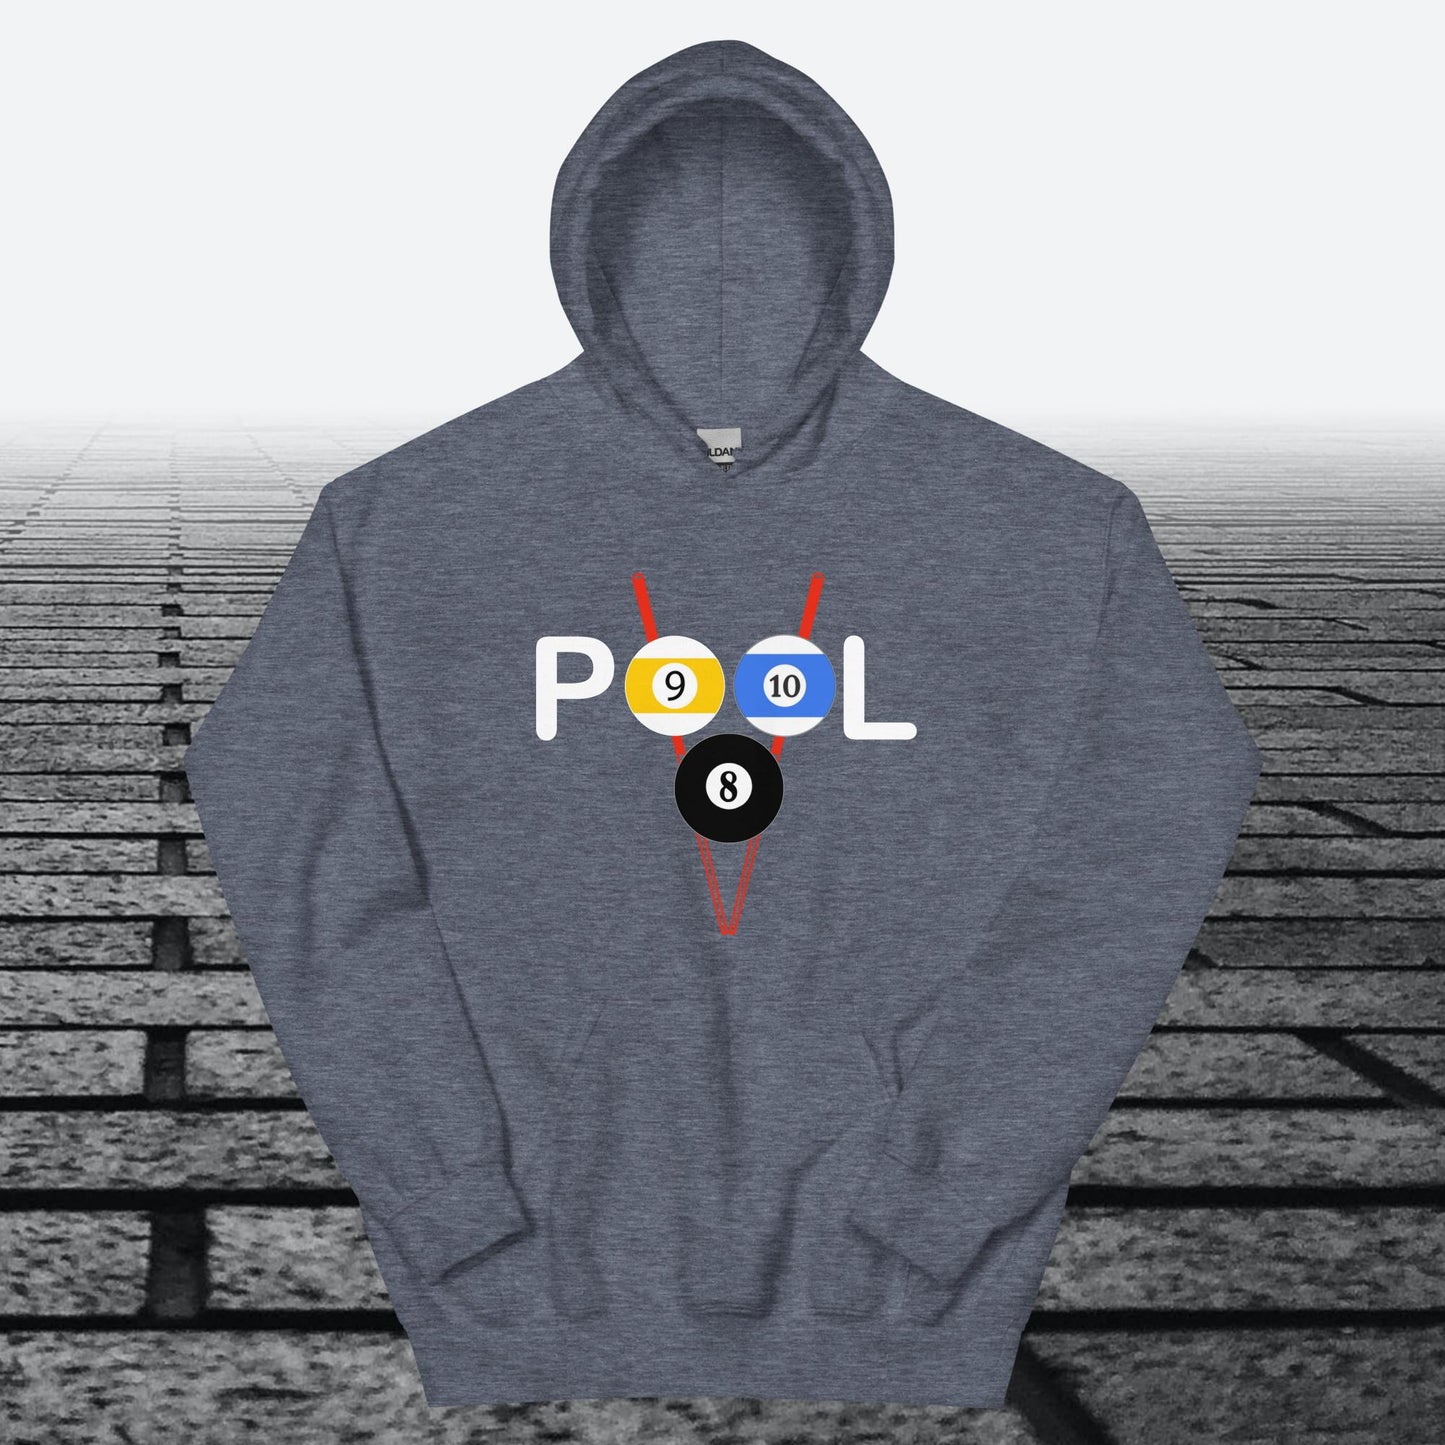 Pool with 8, 9 and 10 ball, on front of hoodie, Hoodie Sweatshirt